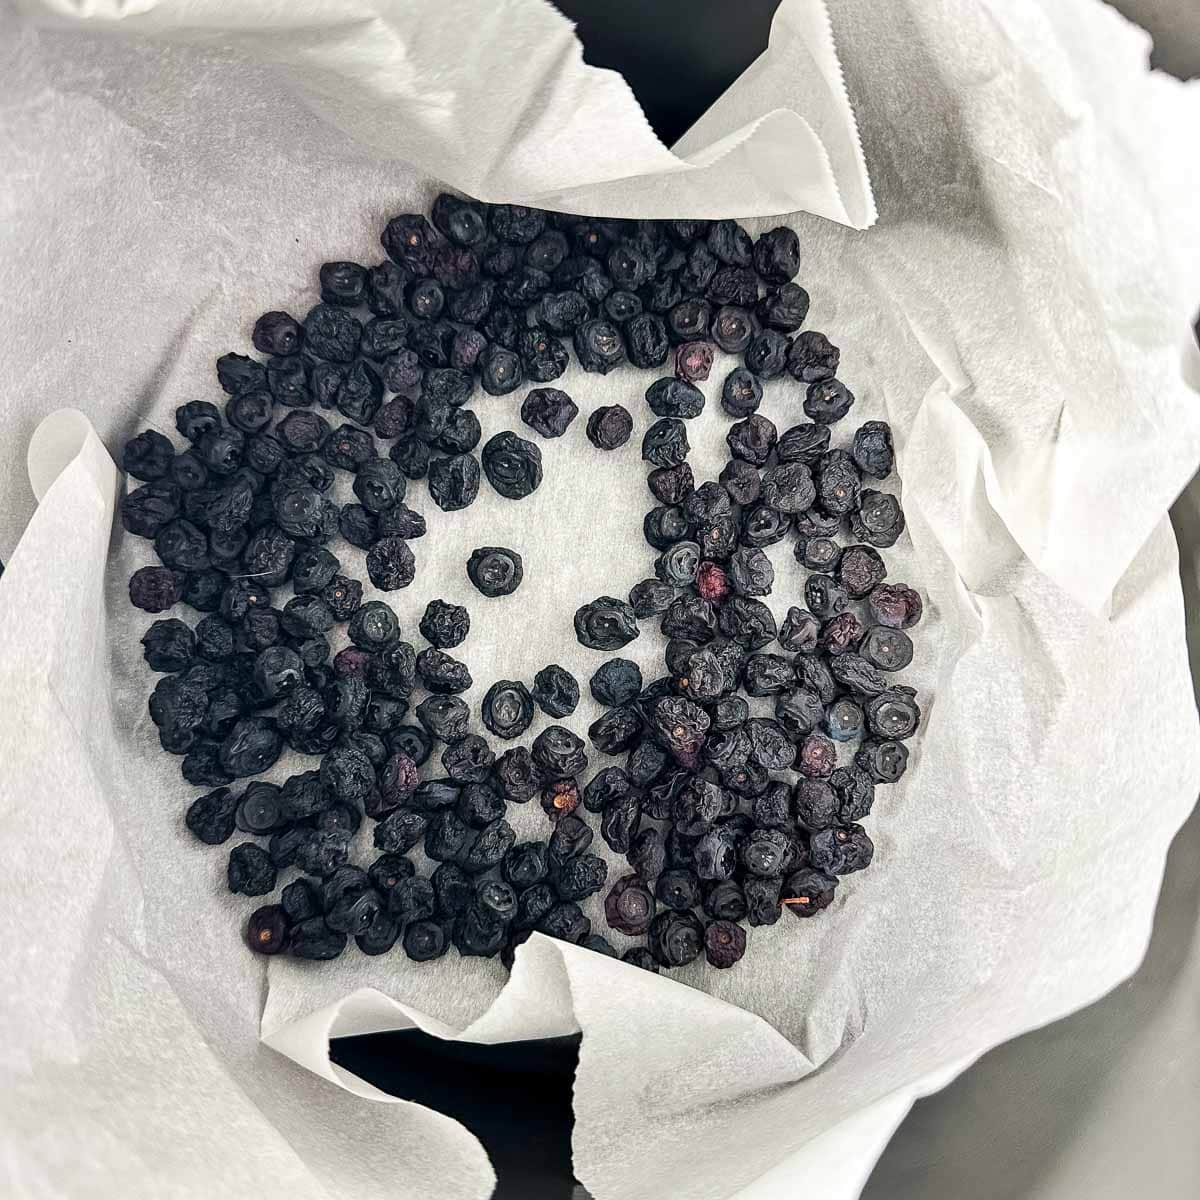 Deydrated blueberries on parchment paper in the basket of an air fryer.